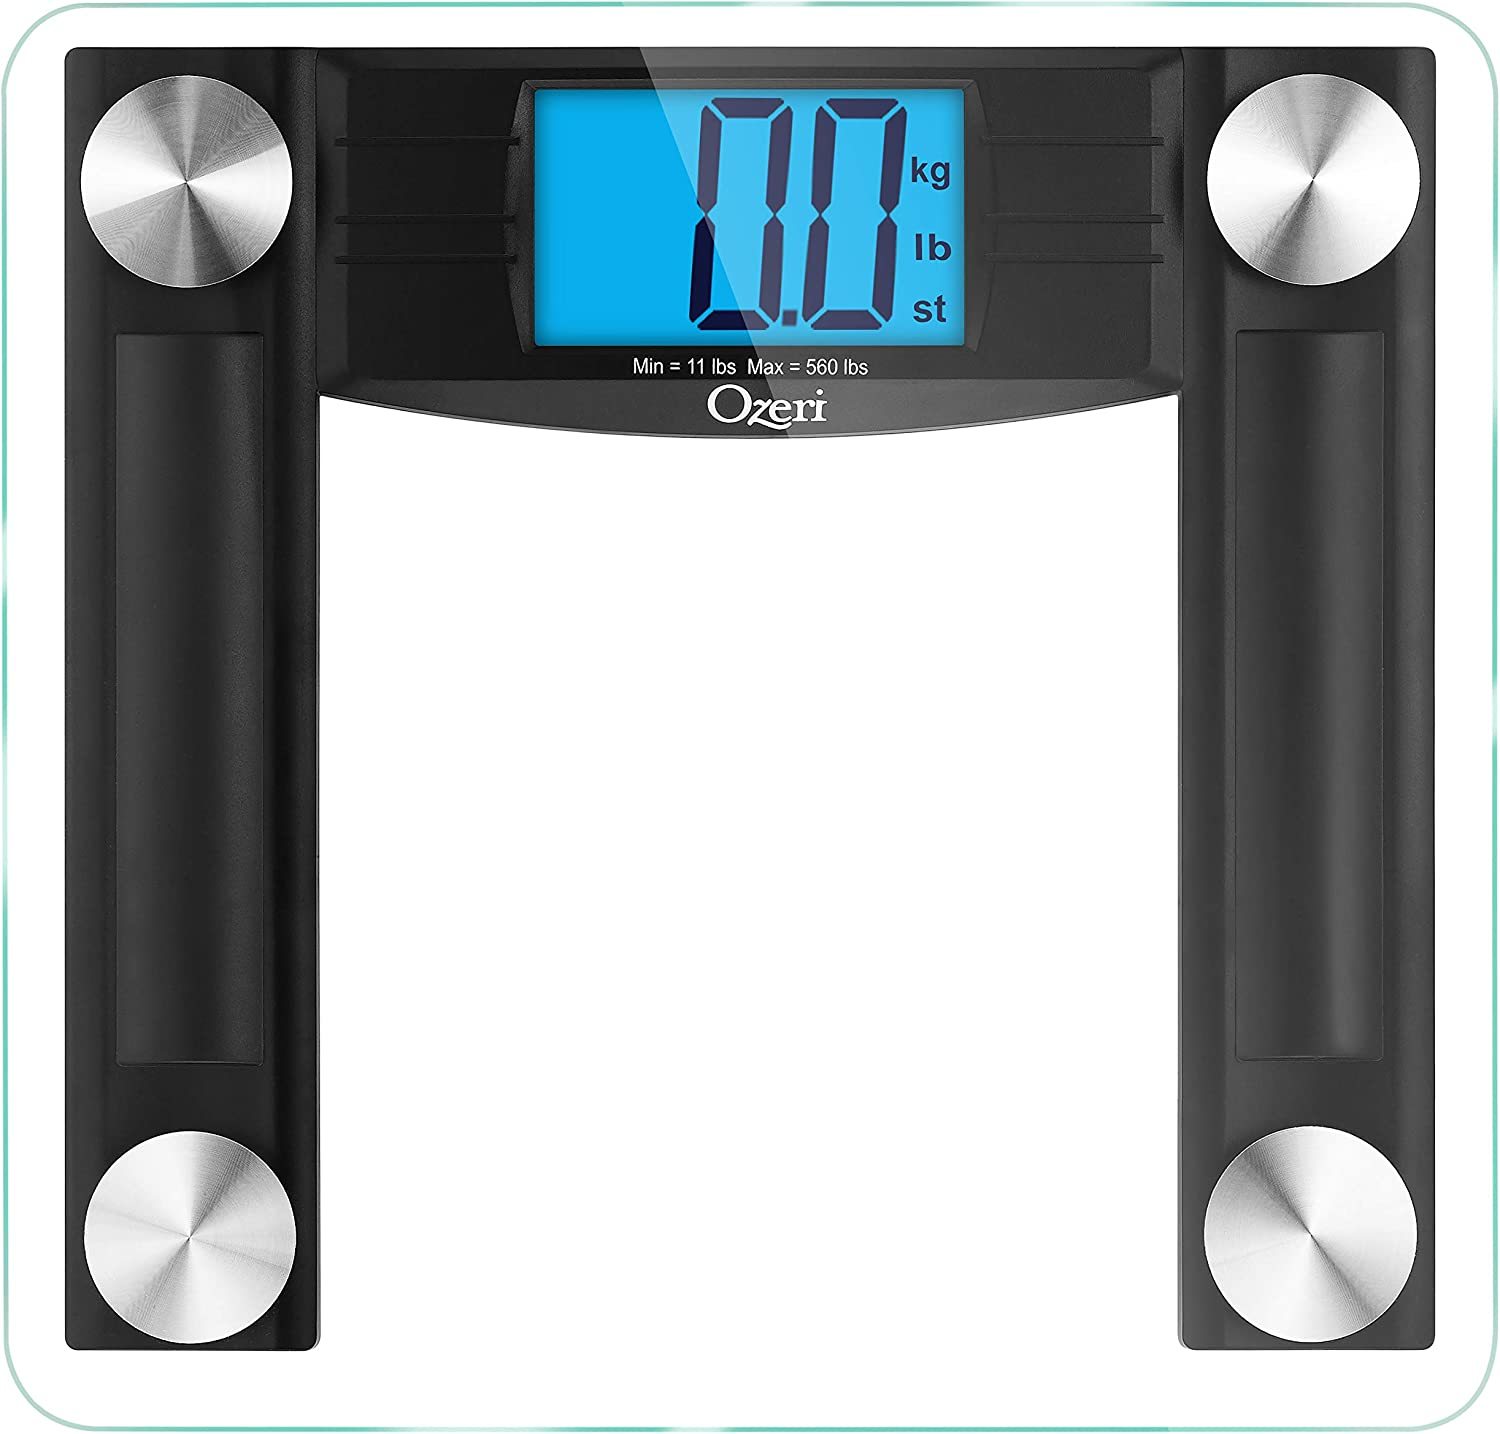 Primary image for Ozeri Promax 560 Lbs / 255 Kg Bath Scale, With 0.1 Lbs / 0.05 Kg Sensor, Black